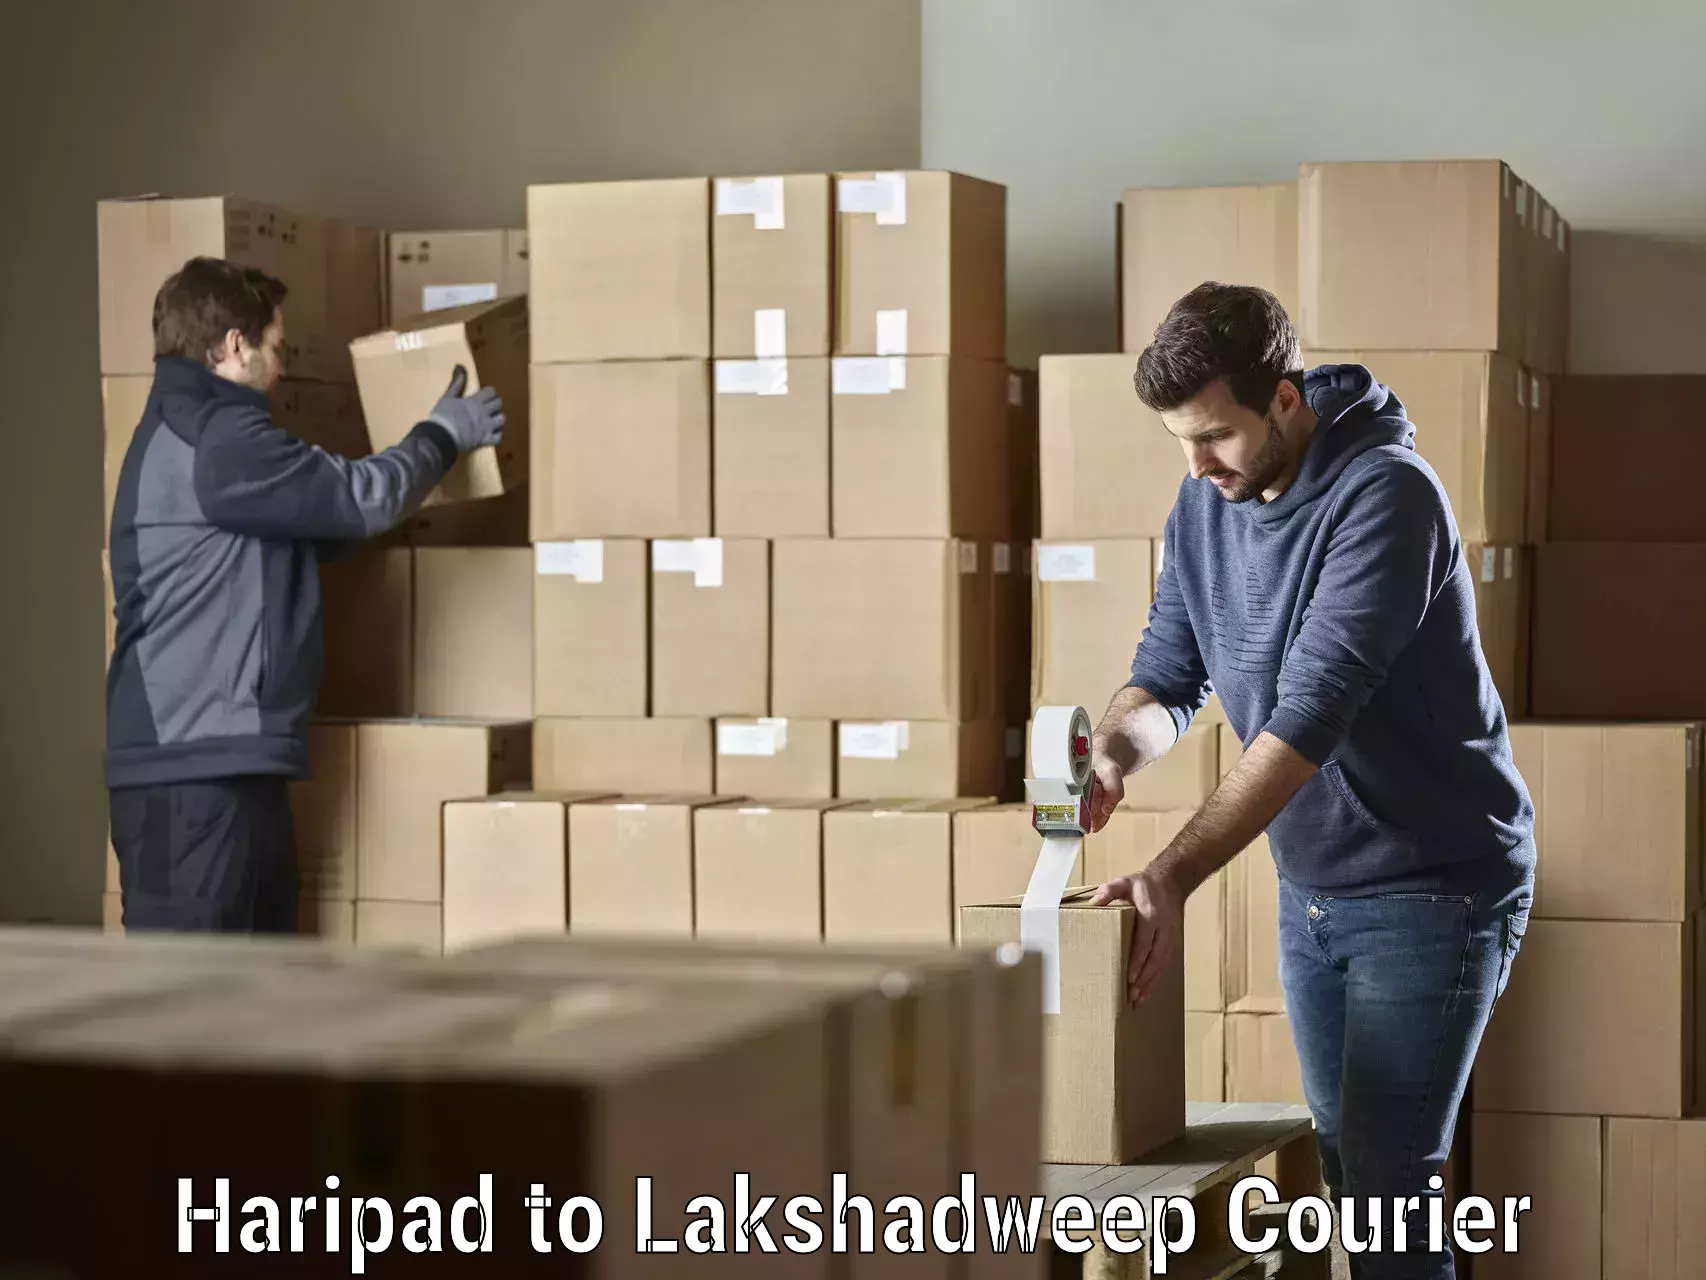 Courier services in Haripad to Lakshadweep